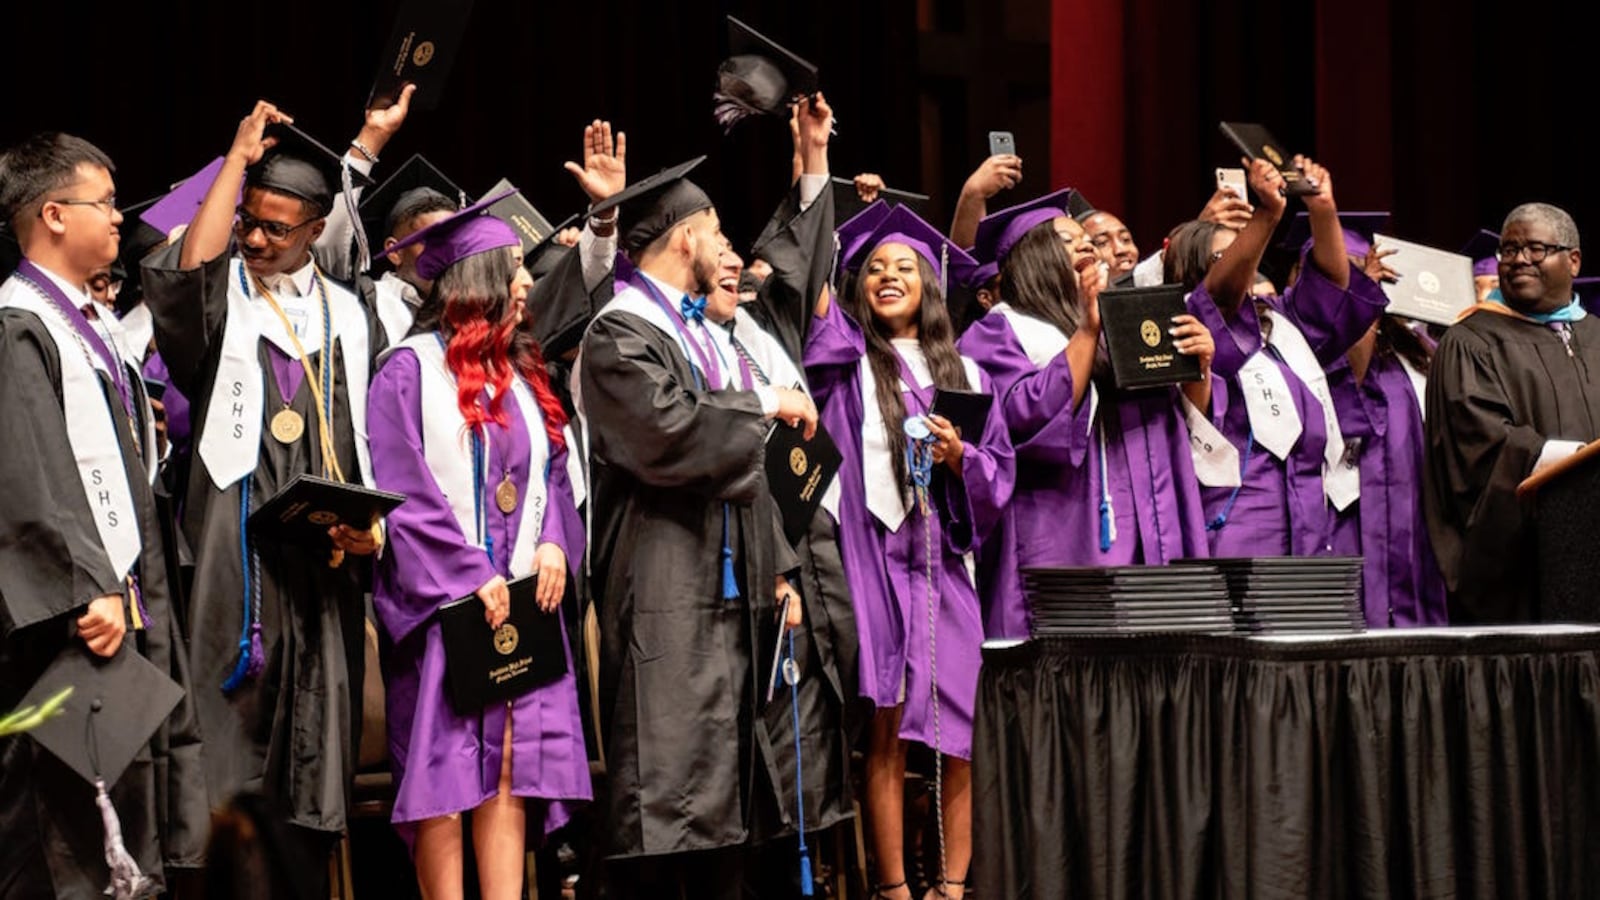 Southwind High School's Class of 2019 celebrates its graduation in May in Memphis. The Shelby County school finished with a 2019 graduation rate of more than 85%.